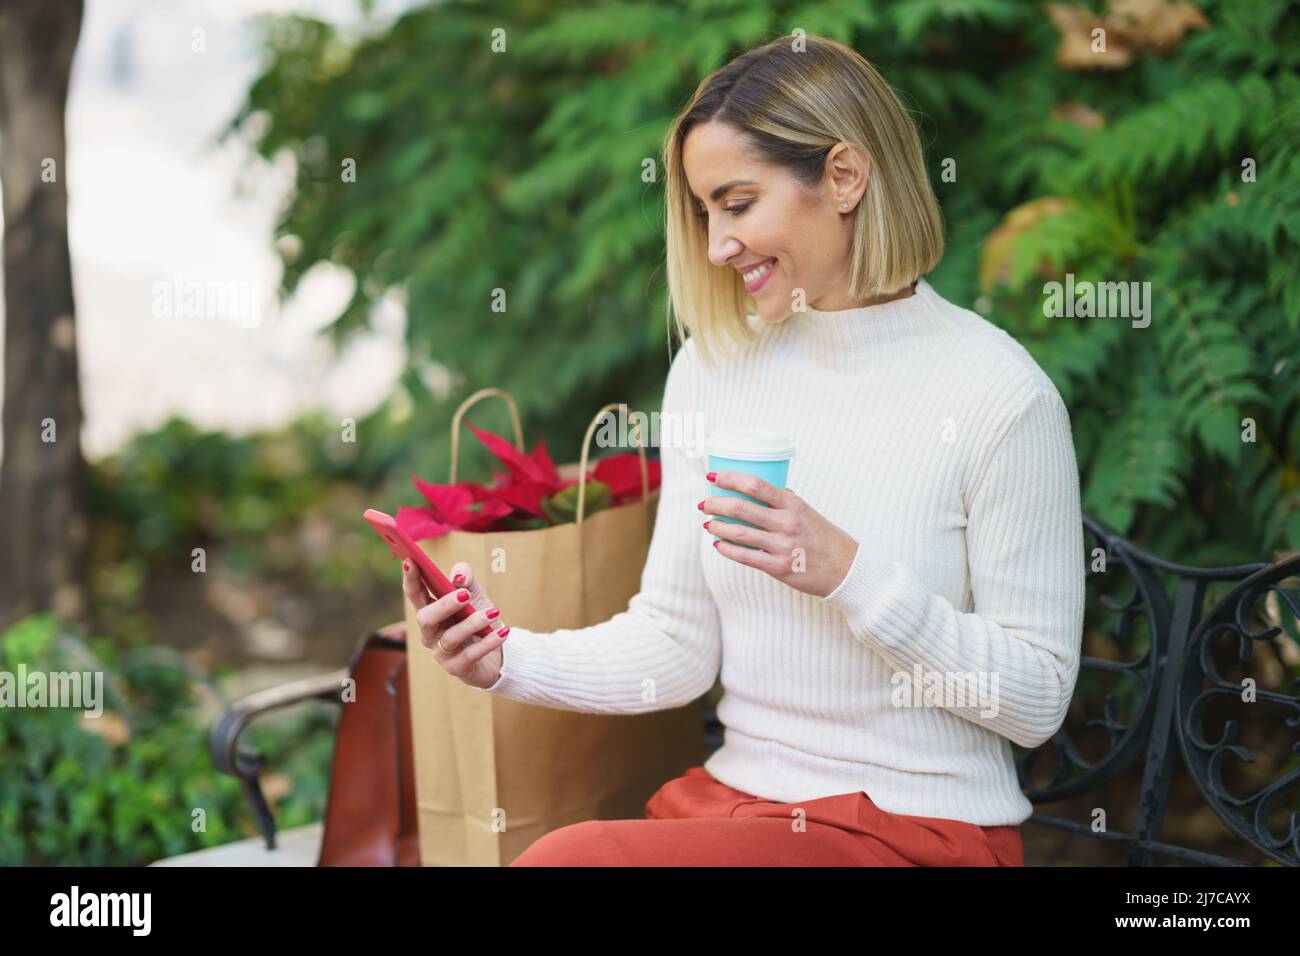 Smiling woman using smartphone and drinking beverage on bench Stock Photo